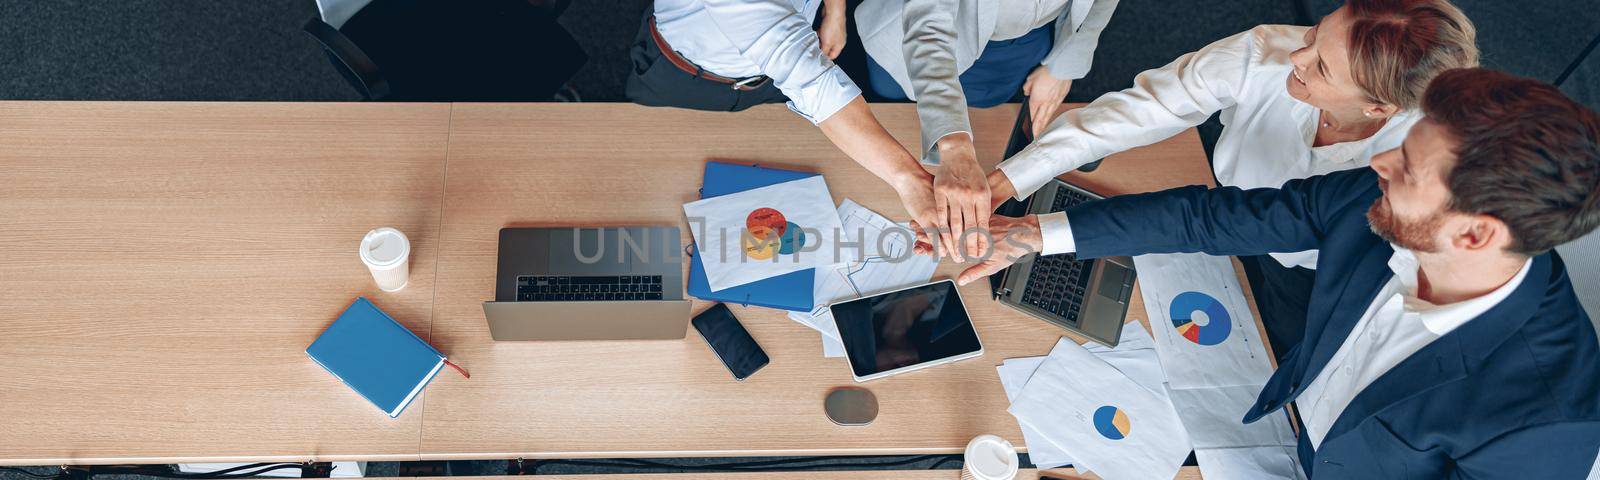 Diverse business people group put hands together while standing near the table in office.